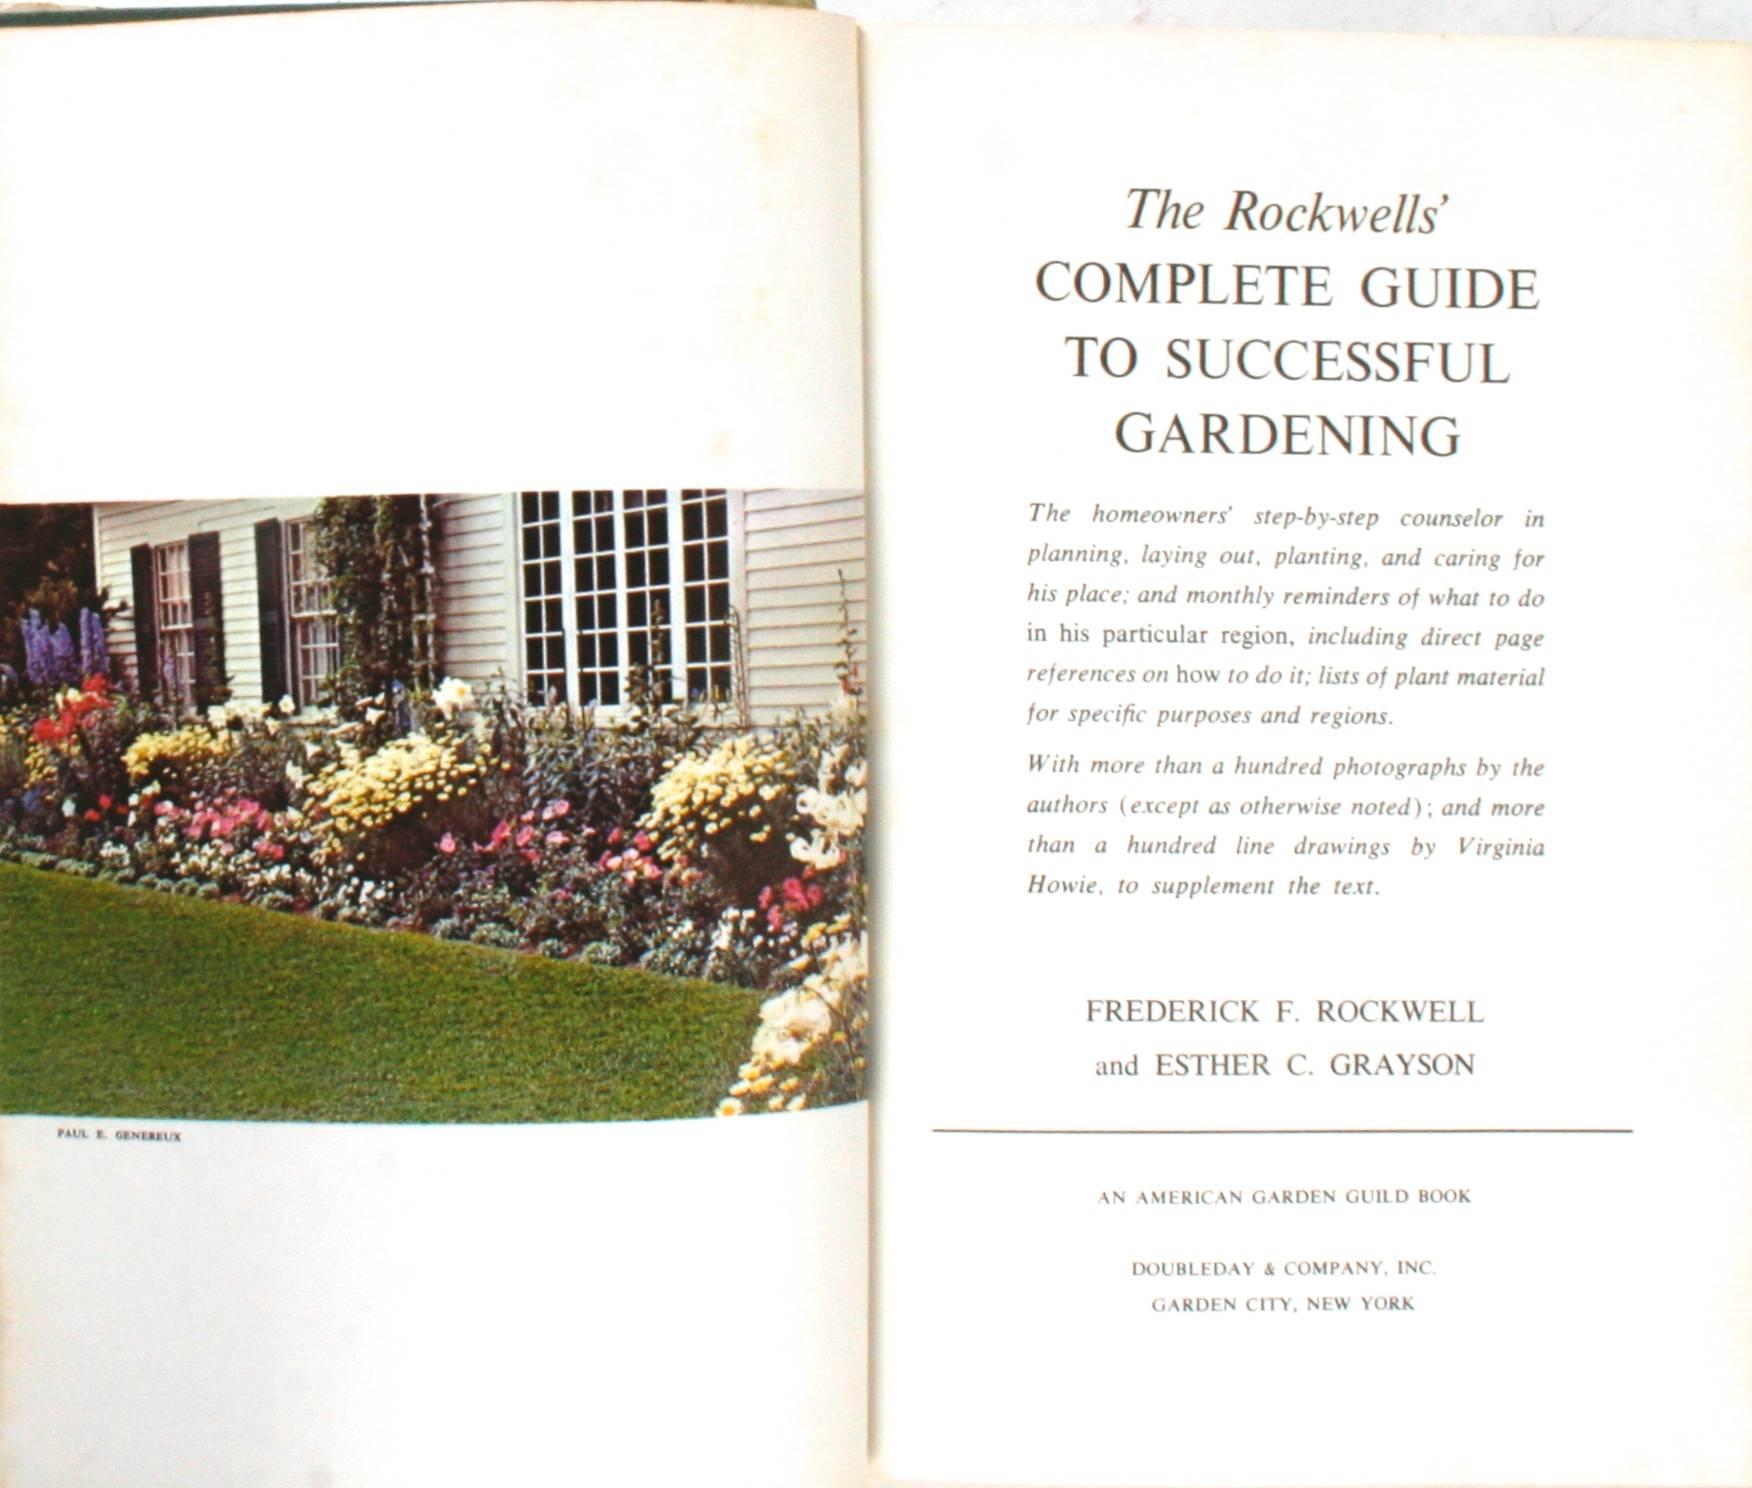 The Rockwell's Complete Guide to Successful Gardening. Garden City: Doubleday & Company, Inc., 1965. First edition second printing hardcover with dust jacket. 571 pp. A gardener's step-by-stem guide to planning, laying out, planting, and caring for